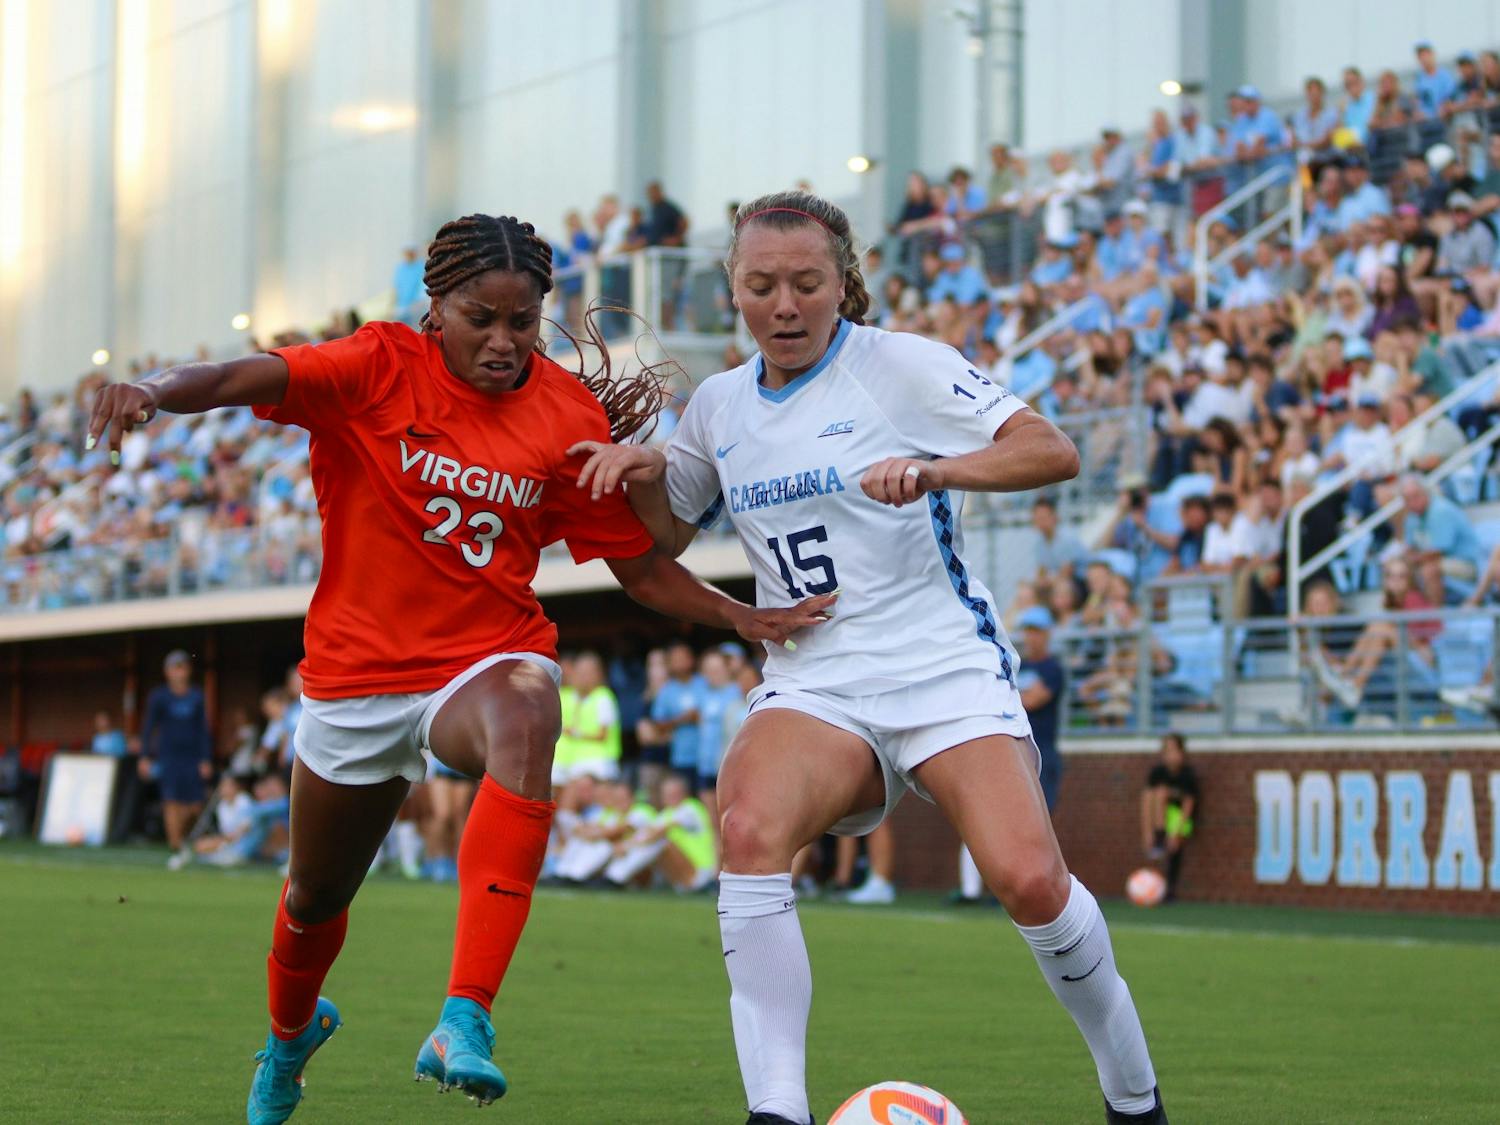 Sophomore forward Avery Patterson (15) fights for possession of the ball with UVA junior defender Laney Rouse (23). At halftime, UNC is leading 2-0 against UVA.